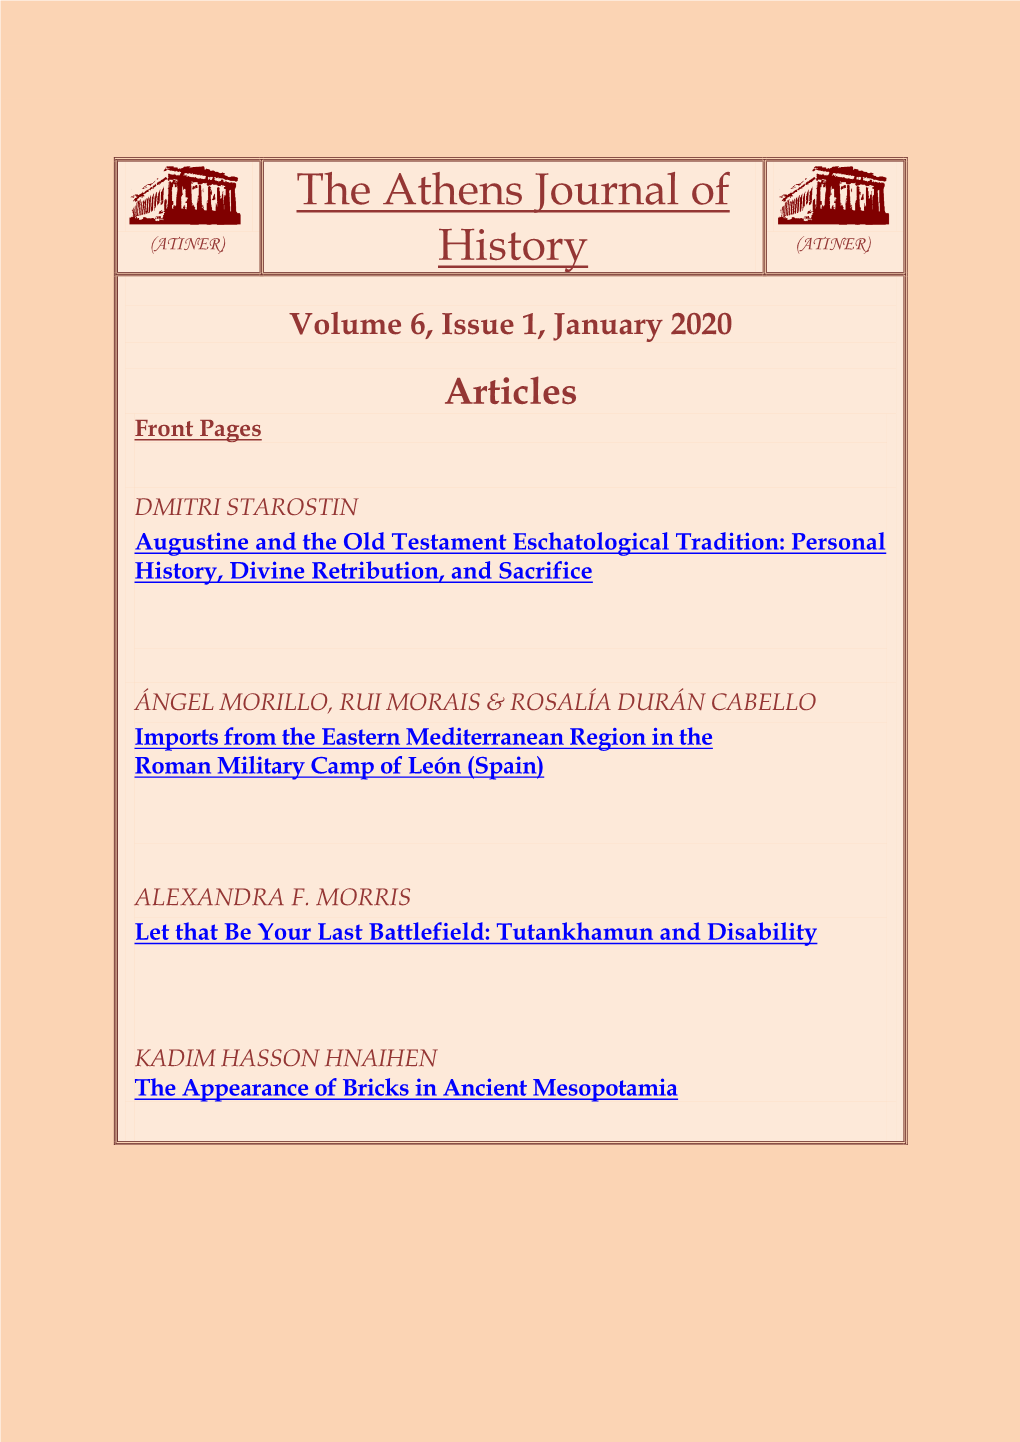 The Athens Journal of History ISSN NUMBER: 2407-9677 - DOI: 10.30958/Ajhis Volume 6, Issue 1, January 2020 Download the Entire Issue (PDF)